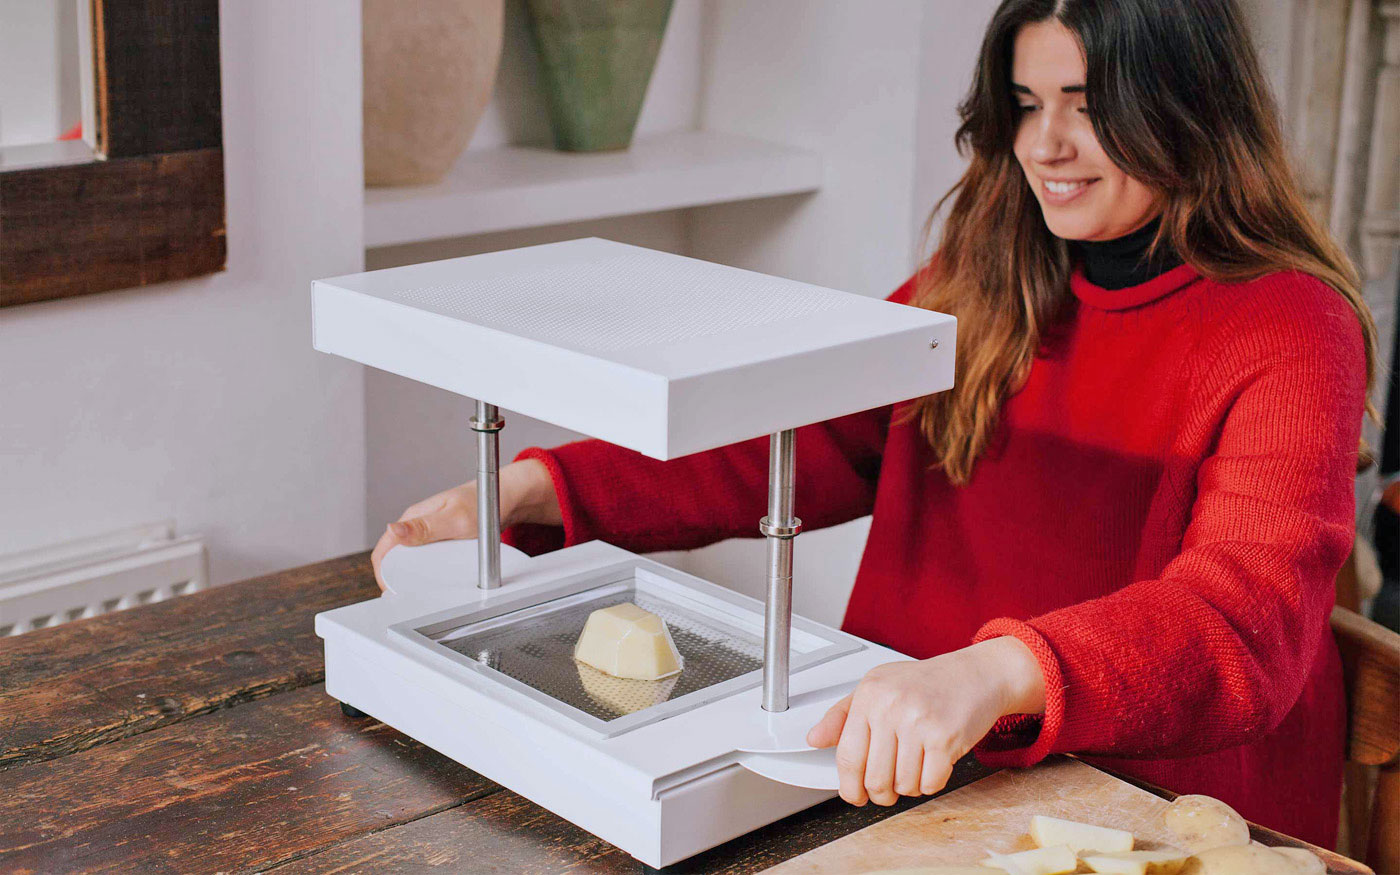 FormBox brings a vacuum-forming factory to your home